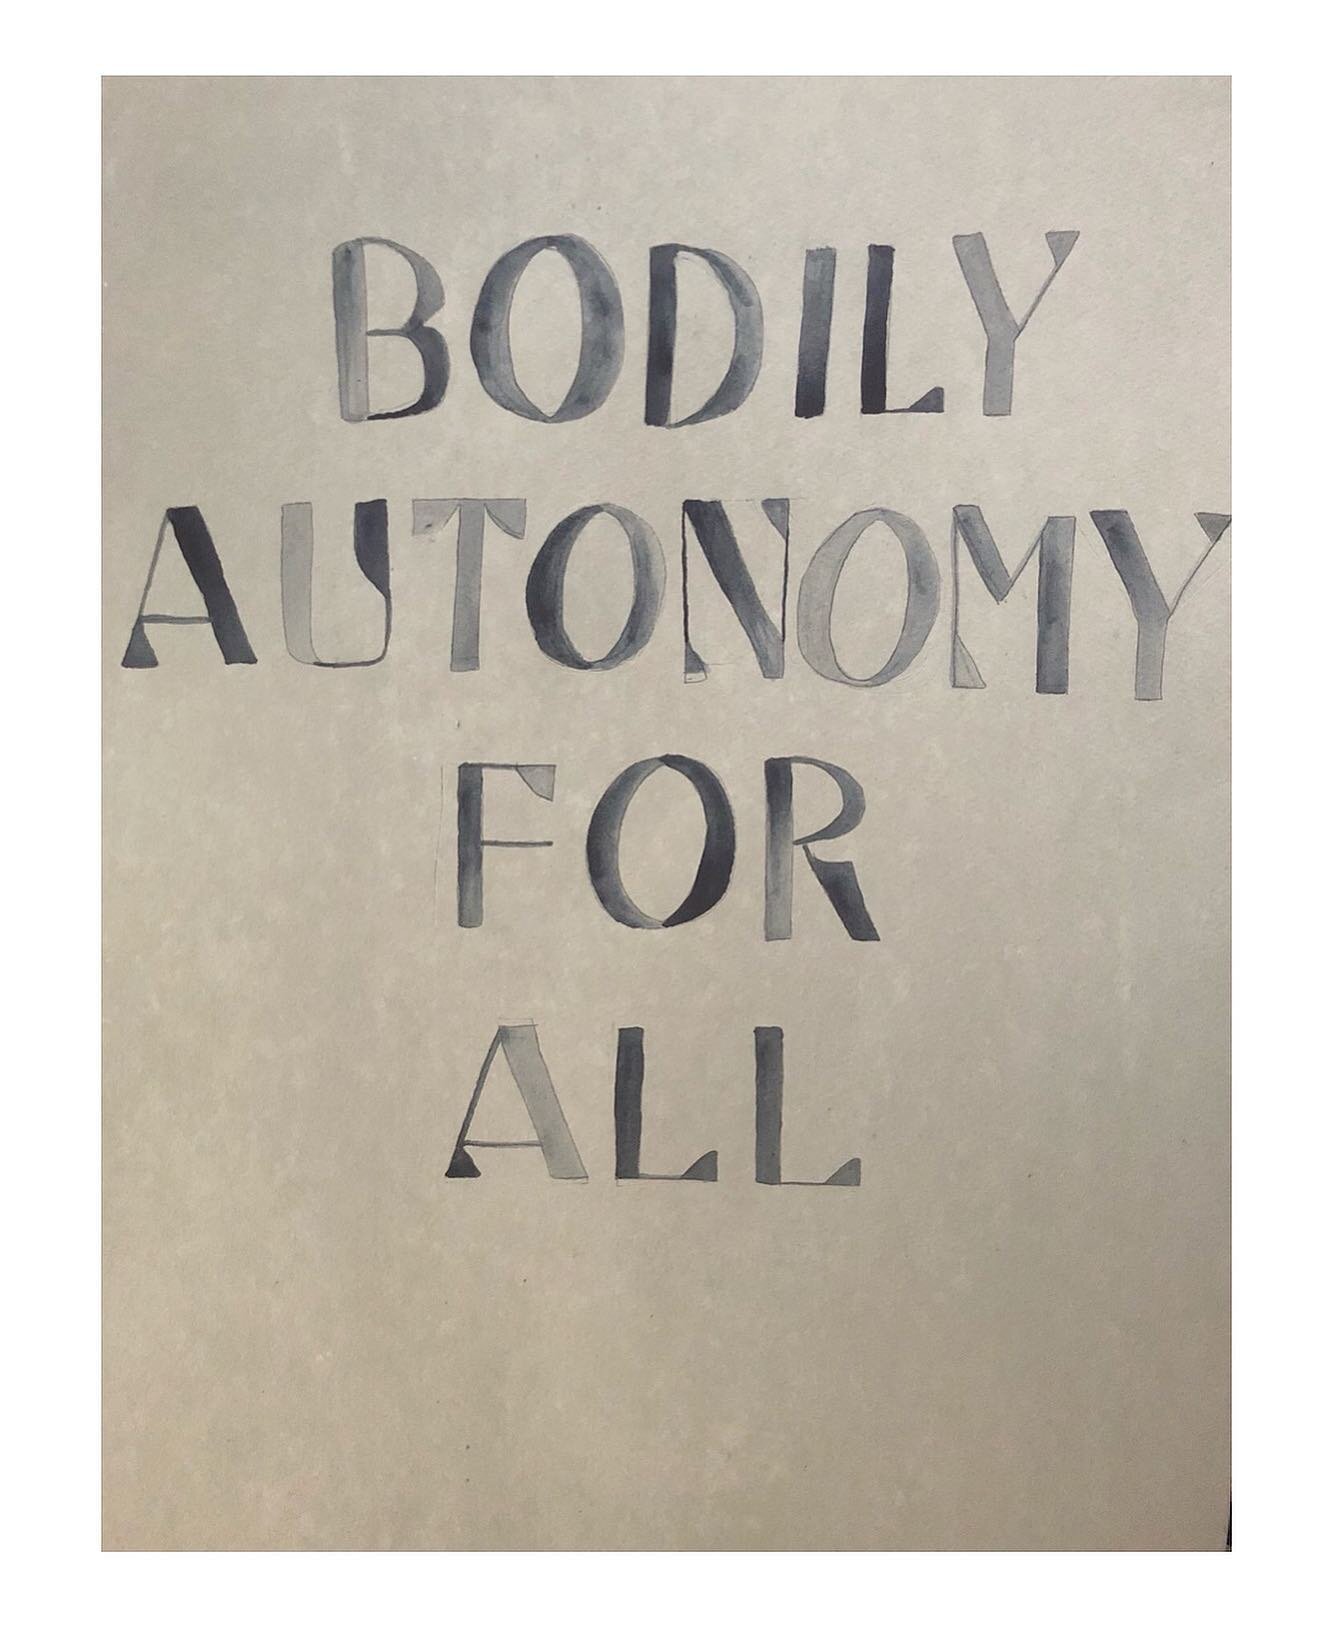 Reproductive justice means honoring and upholding the human right for bodily autonomy. 
.
Image: Indigo pigment on natural paper 
.
#bodilyautonomy #humanrights #bansoffourbodies #womenshealthprotectionact #reproductivejustice #womensmarch #womensmar